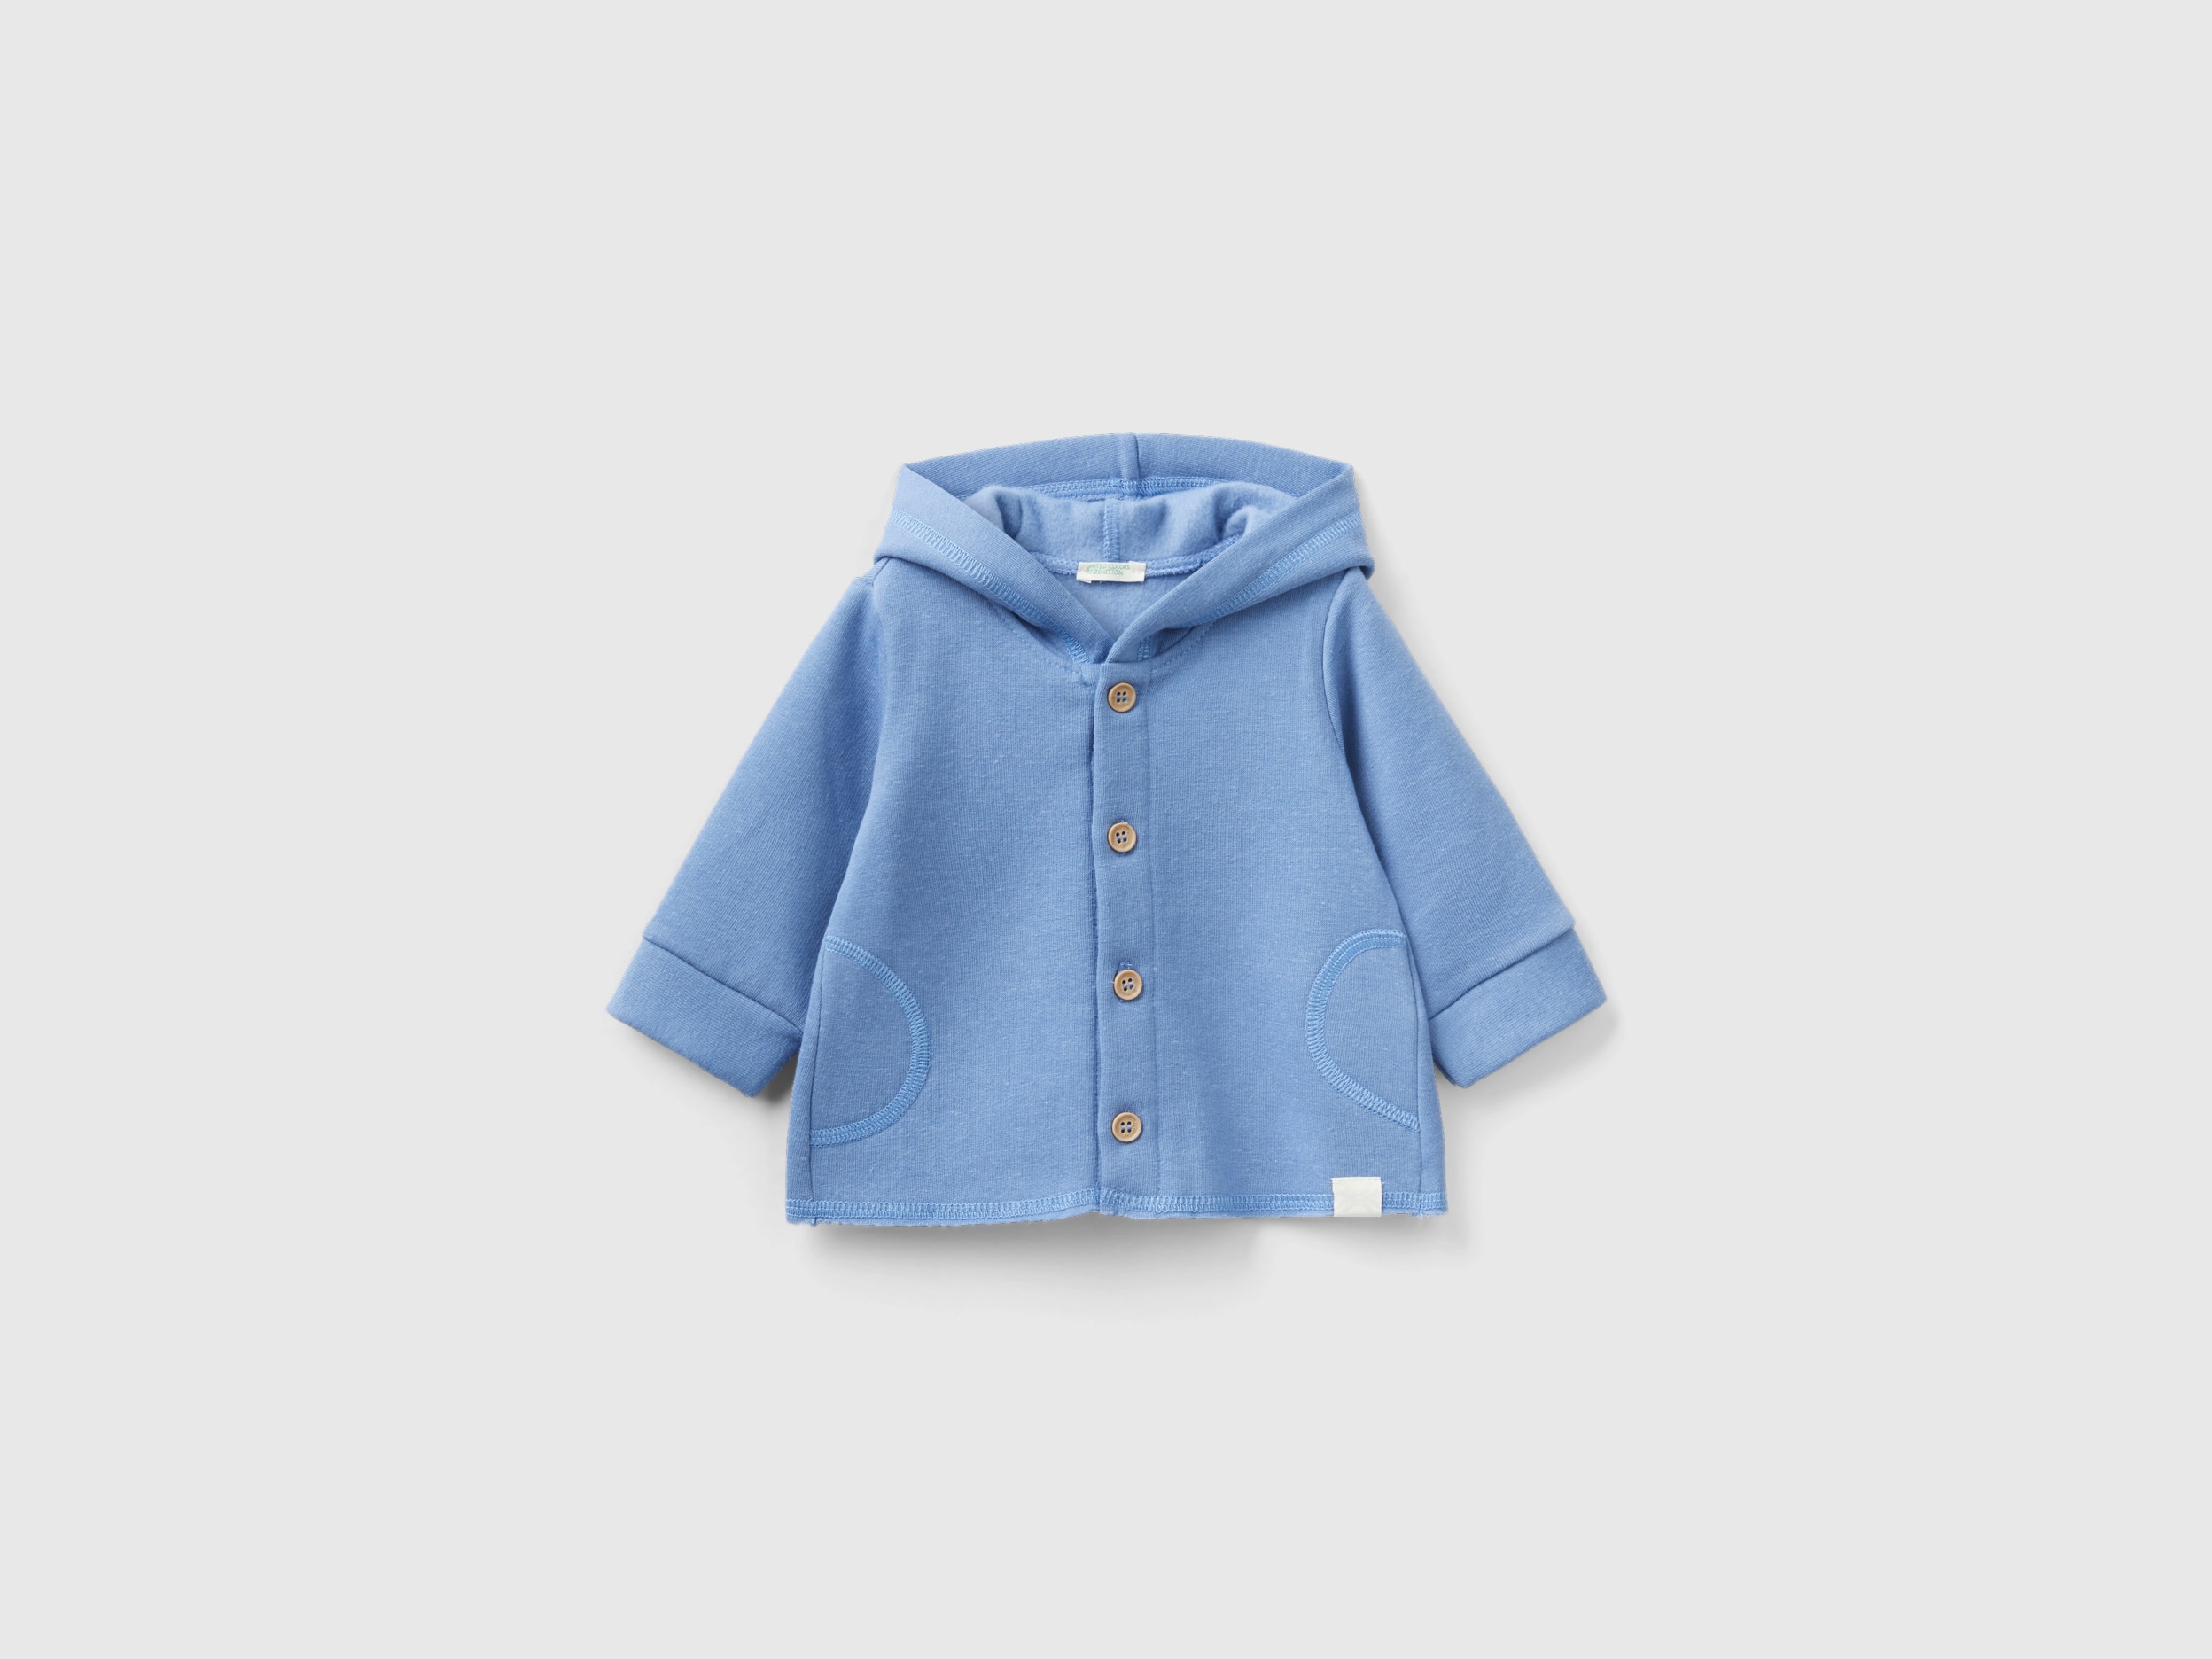 Benetton, Hoodie In Recycled Fabric, size 0-1, Light Blue, Kids